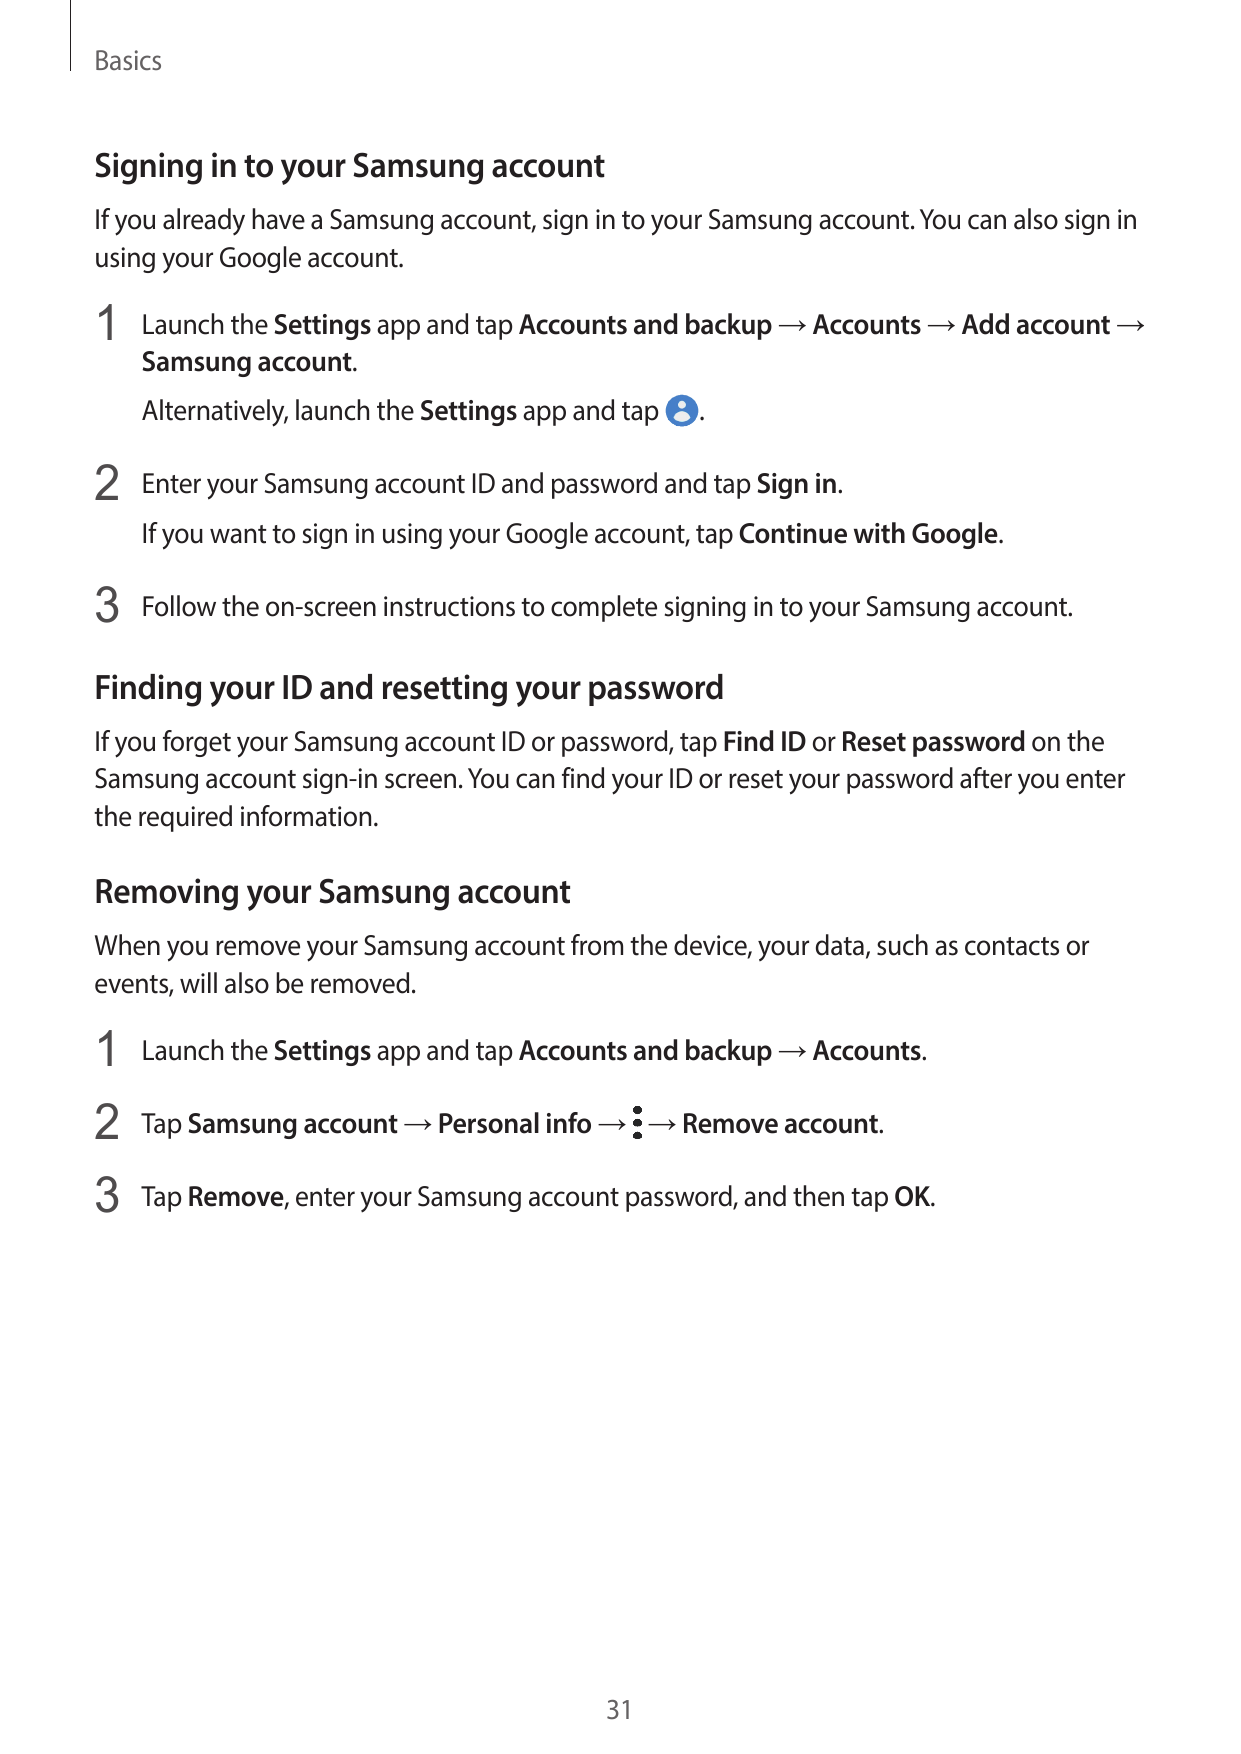 BasicsSigning in to your Samsung accountIf you already have a Samsung account, sign in to your Samsung account. You can also sig